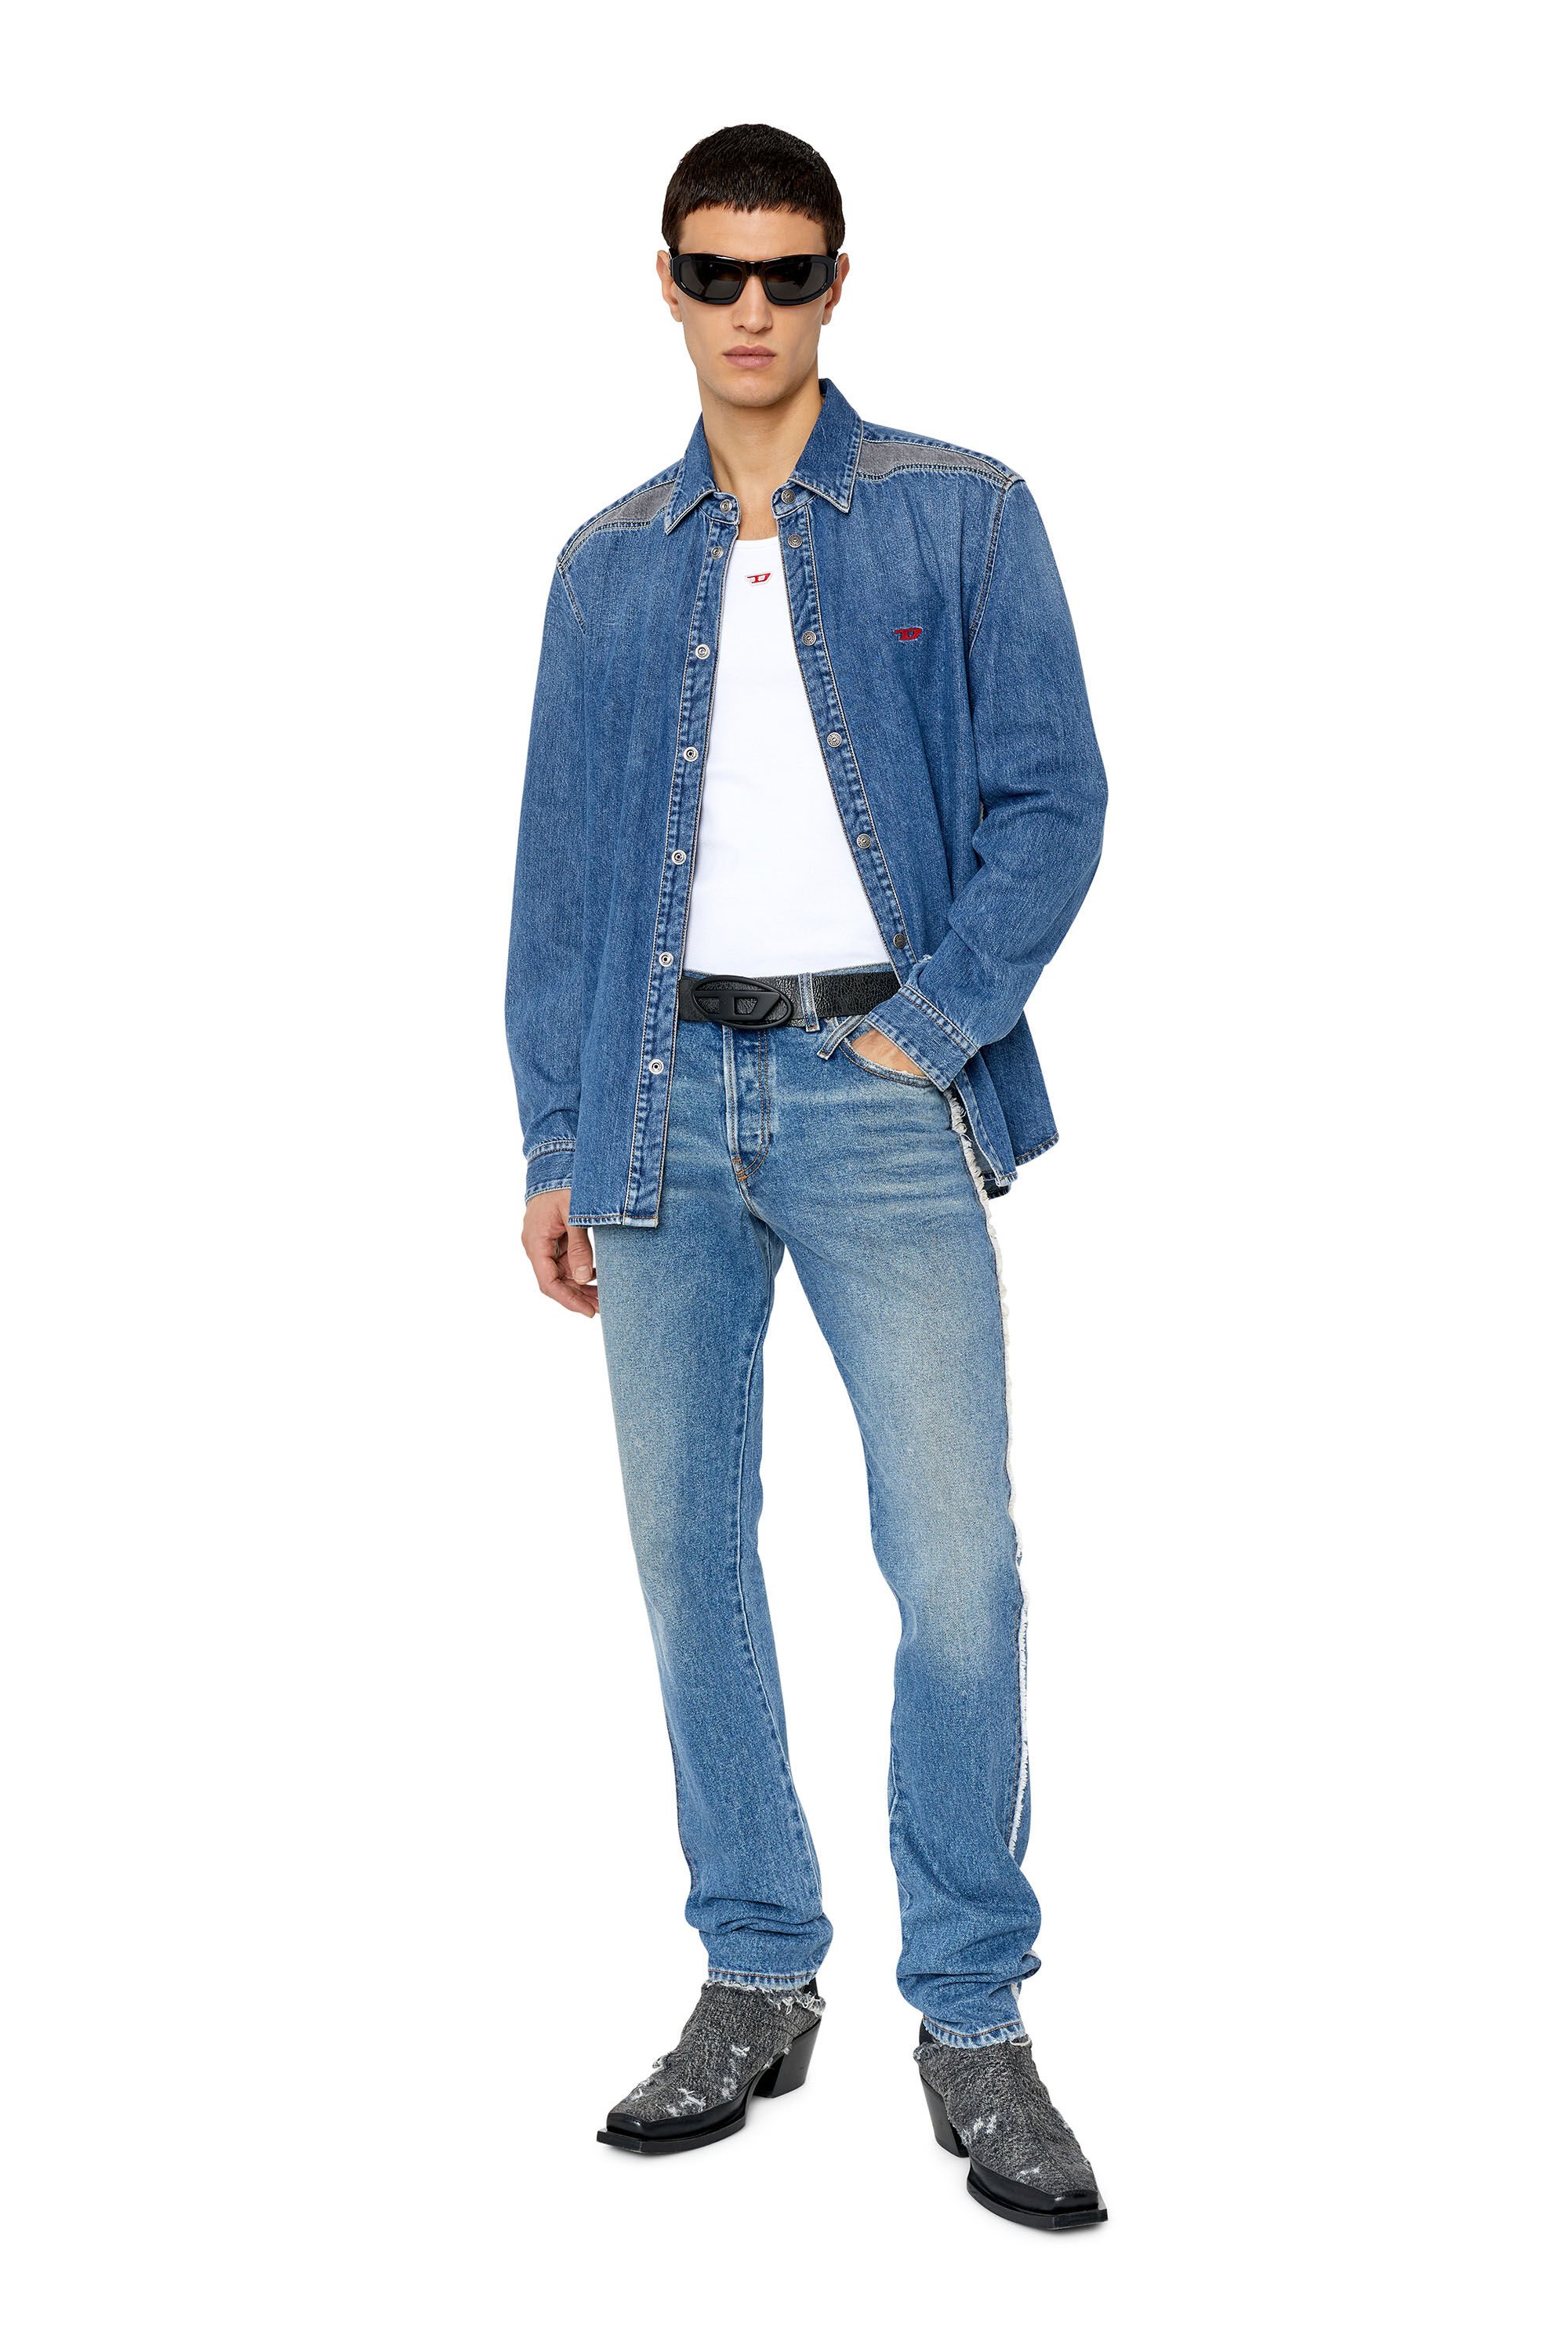 D-SIMPLY-RS Man: Denim shirt with contrast inserts | Diesel